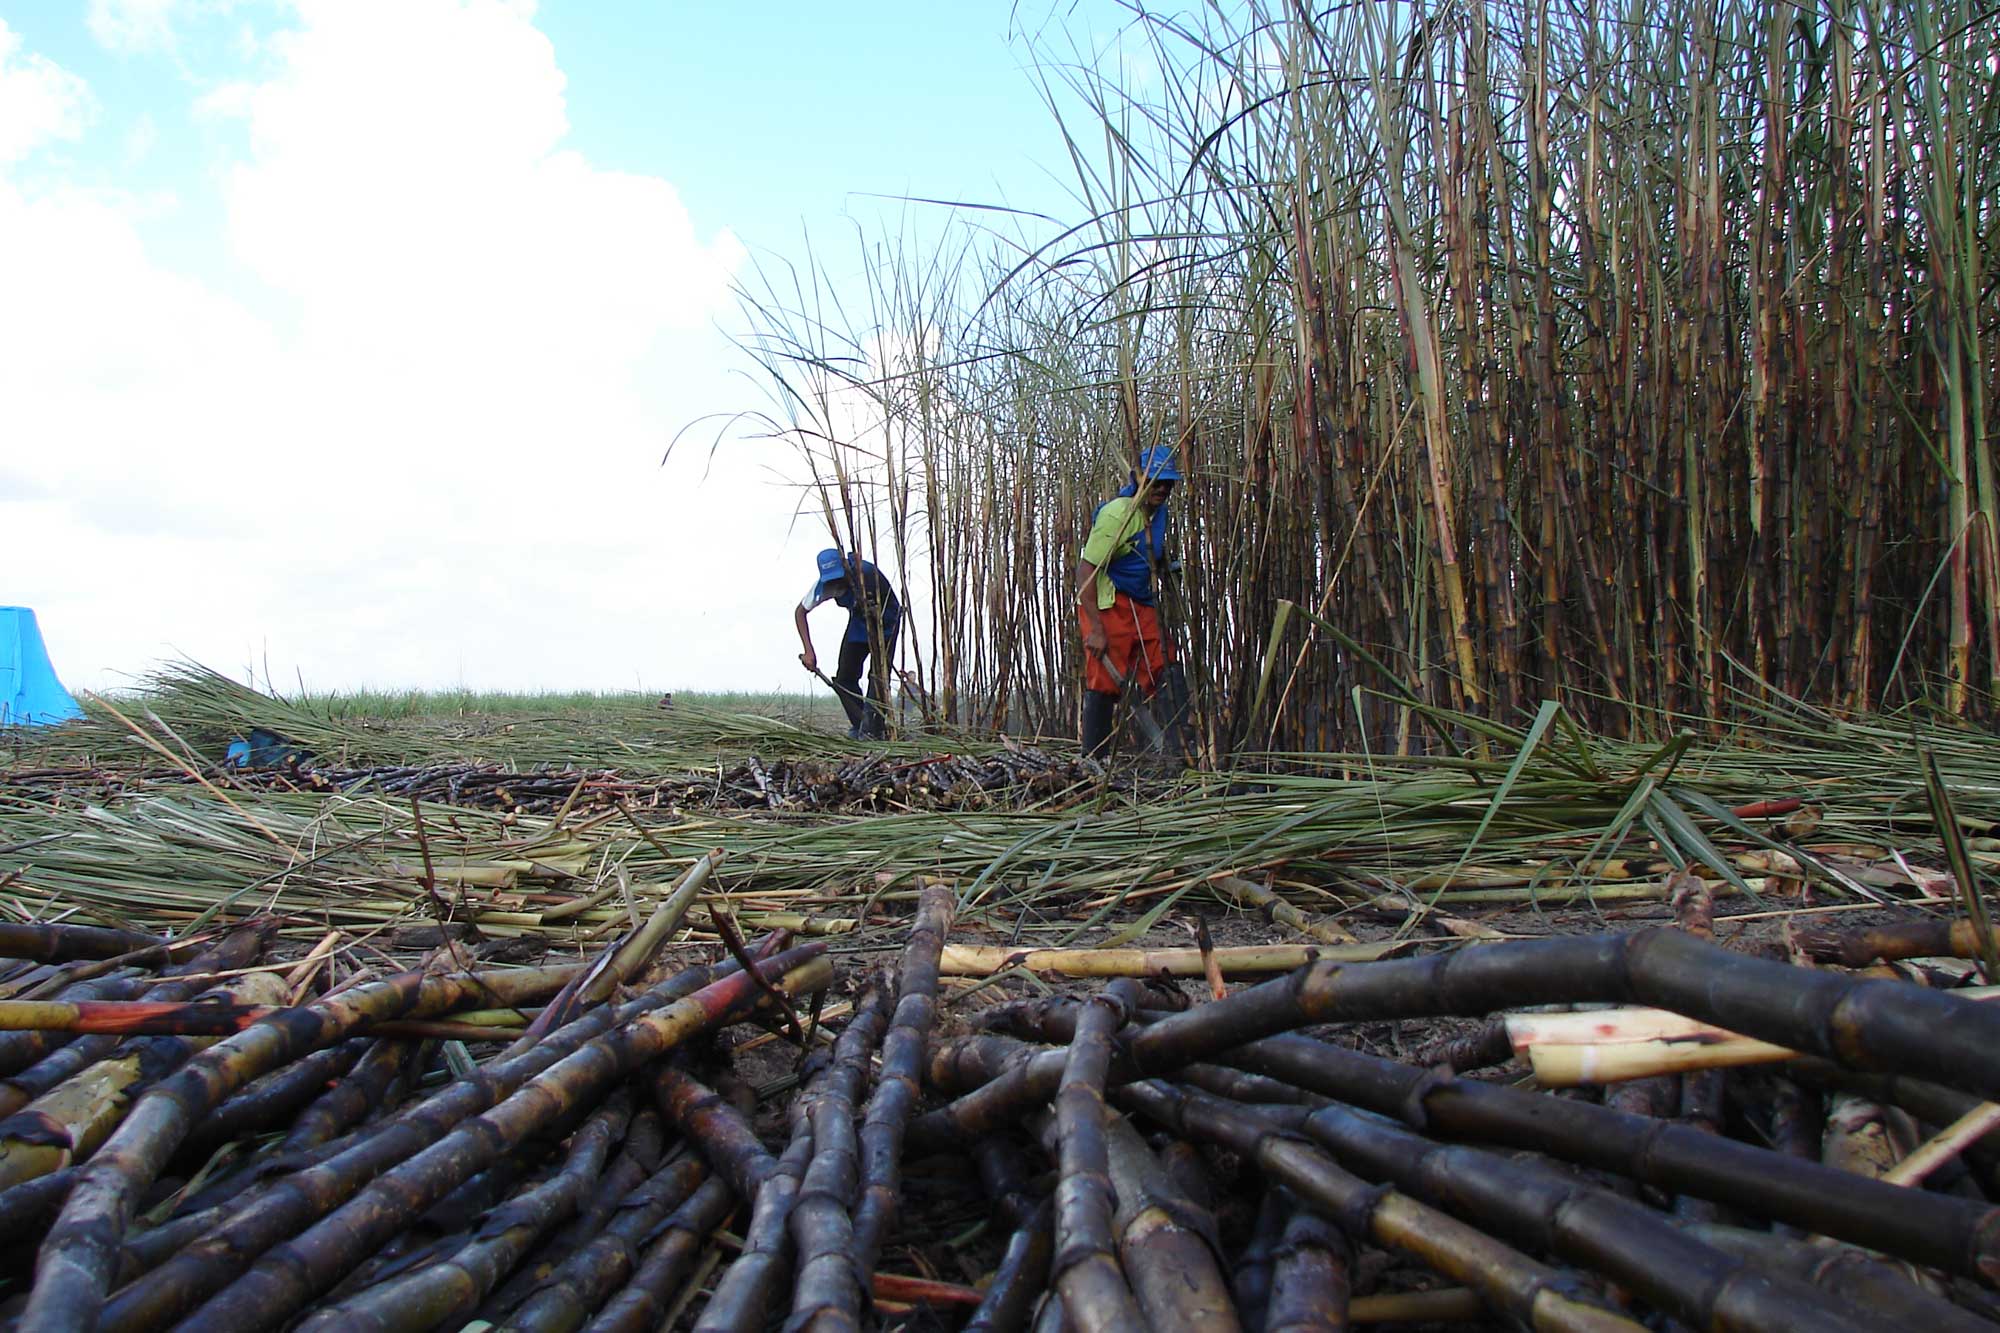 Photograph of sugarcane harvesters cutting sugarcane after it has been burnt. Two men are cutting sugarcane by hand. On is bending down with a large knife to cut the upright stalks. The other man is walking near the standing cane. In the foreground, burnt sugarcane stalks can be seen.